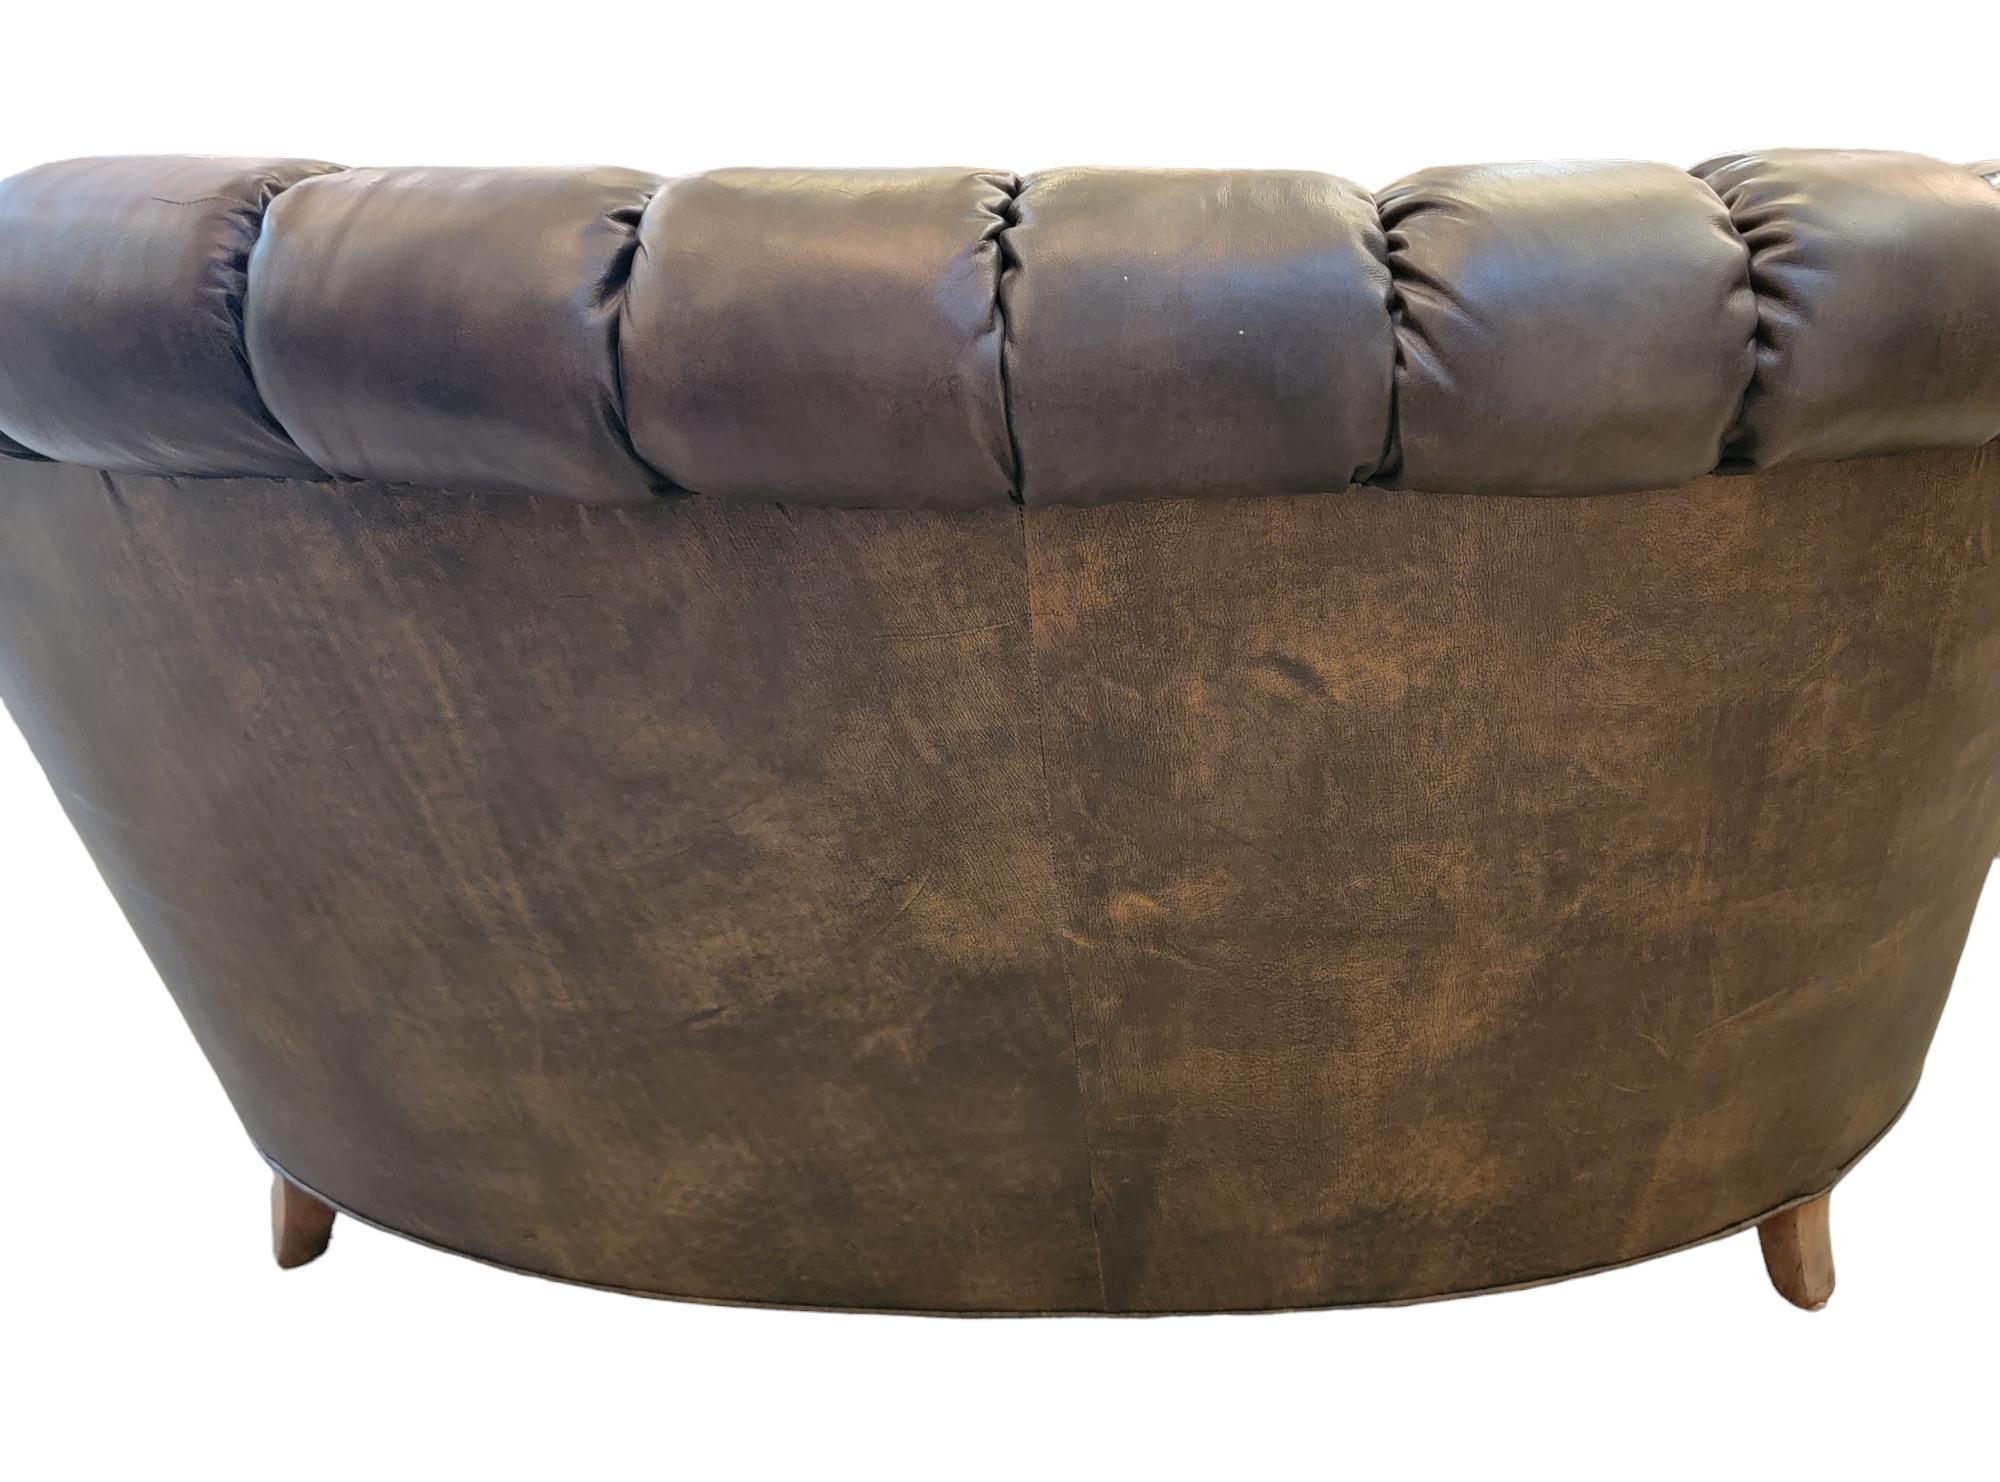 Leather Antique English Chester field Sofa with Hand Carved Wood Lion Legs For Sale